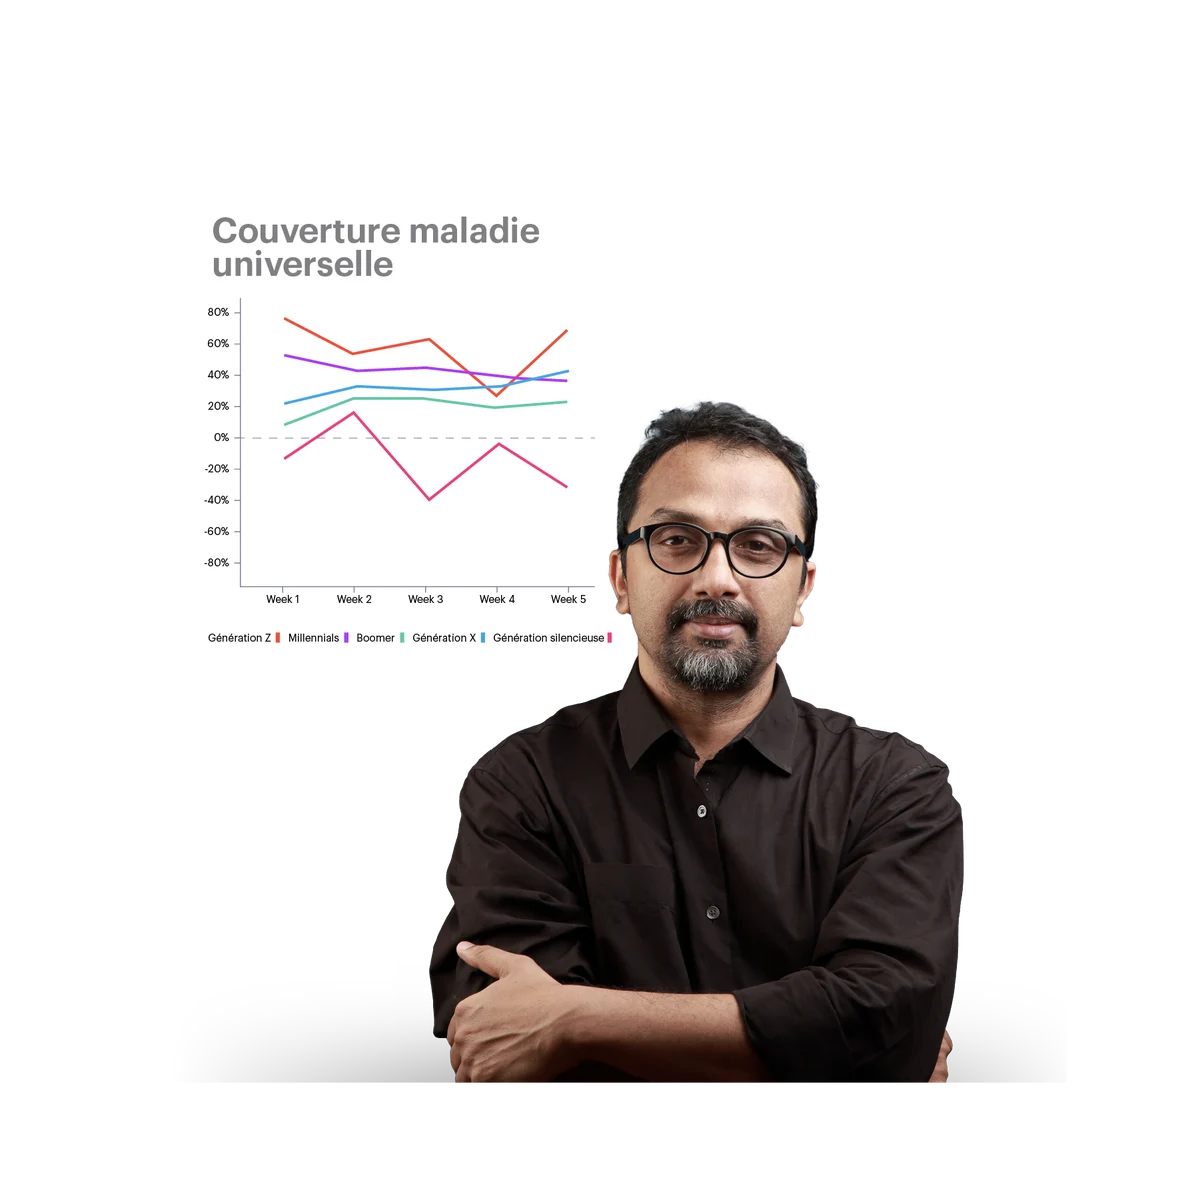 man with glasses, a blackshirt and different data metrics behind him